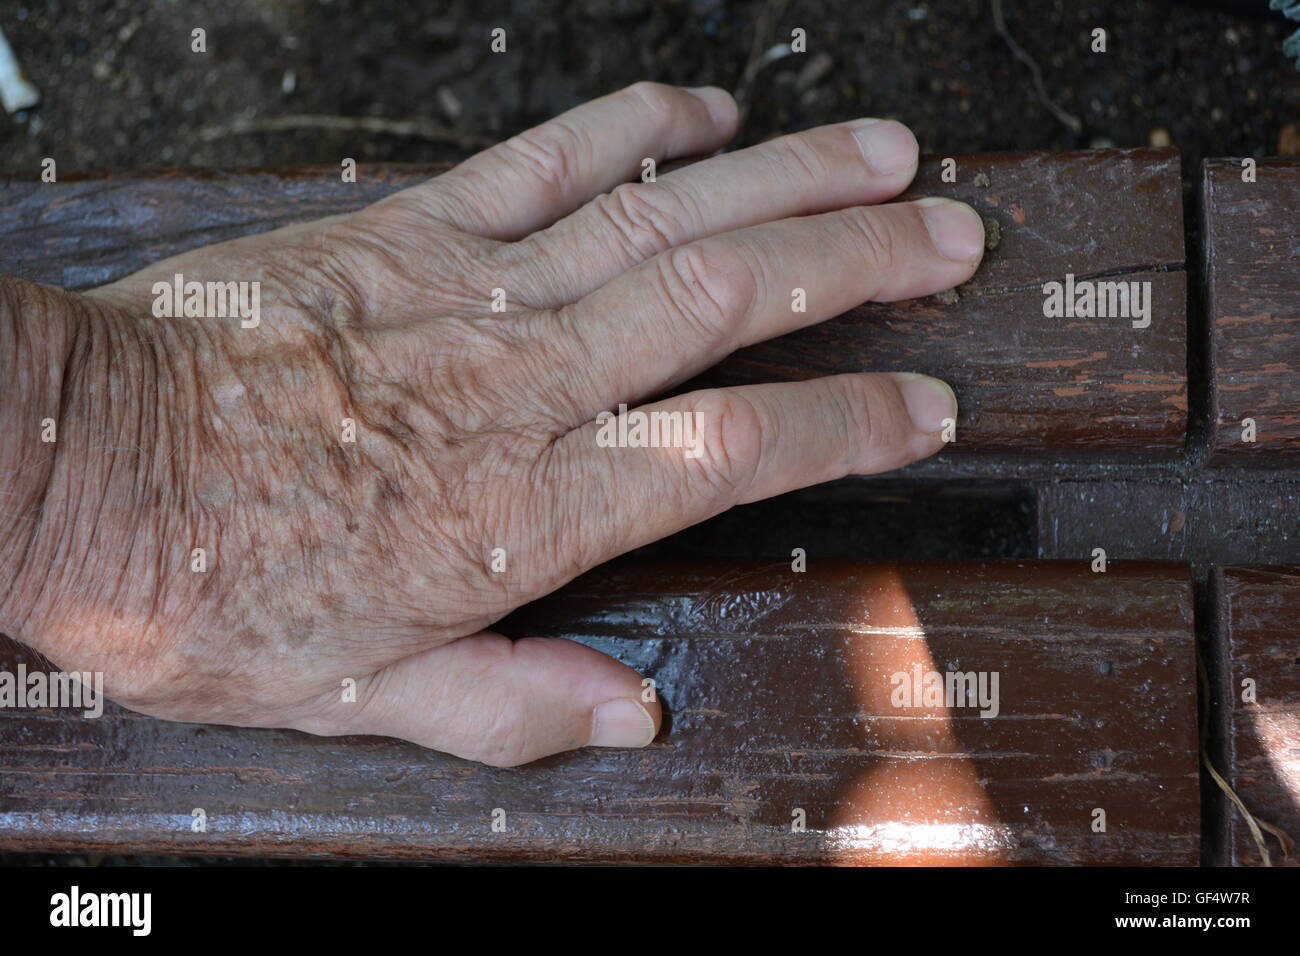 Senior Man Hand. A hand of an old man resting on a bench. Stock Photo